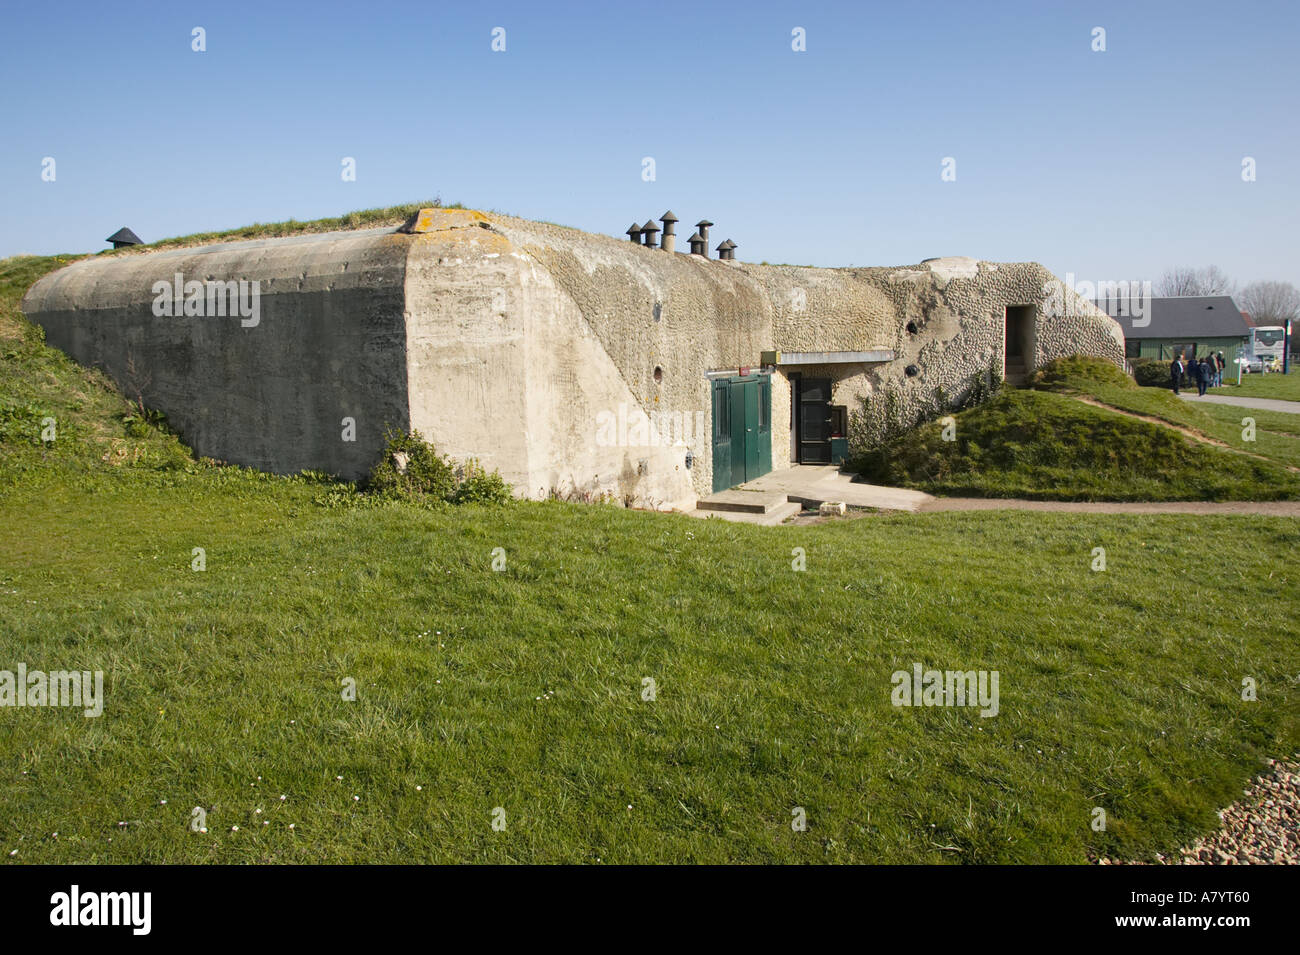 Number 1 Casemate at the Merville Battery, Merville, Normandy, France - an historic D-Day battlefield site Stock Photo